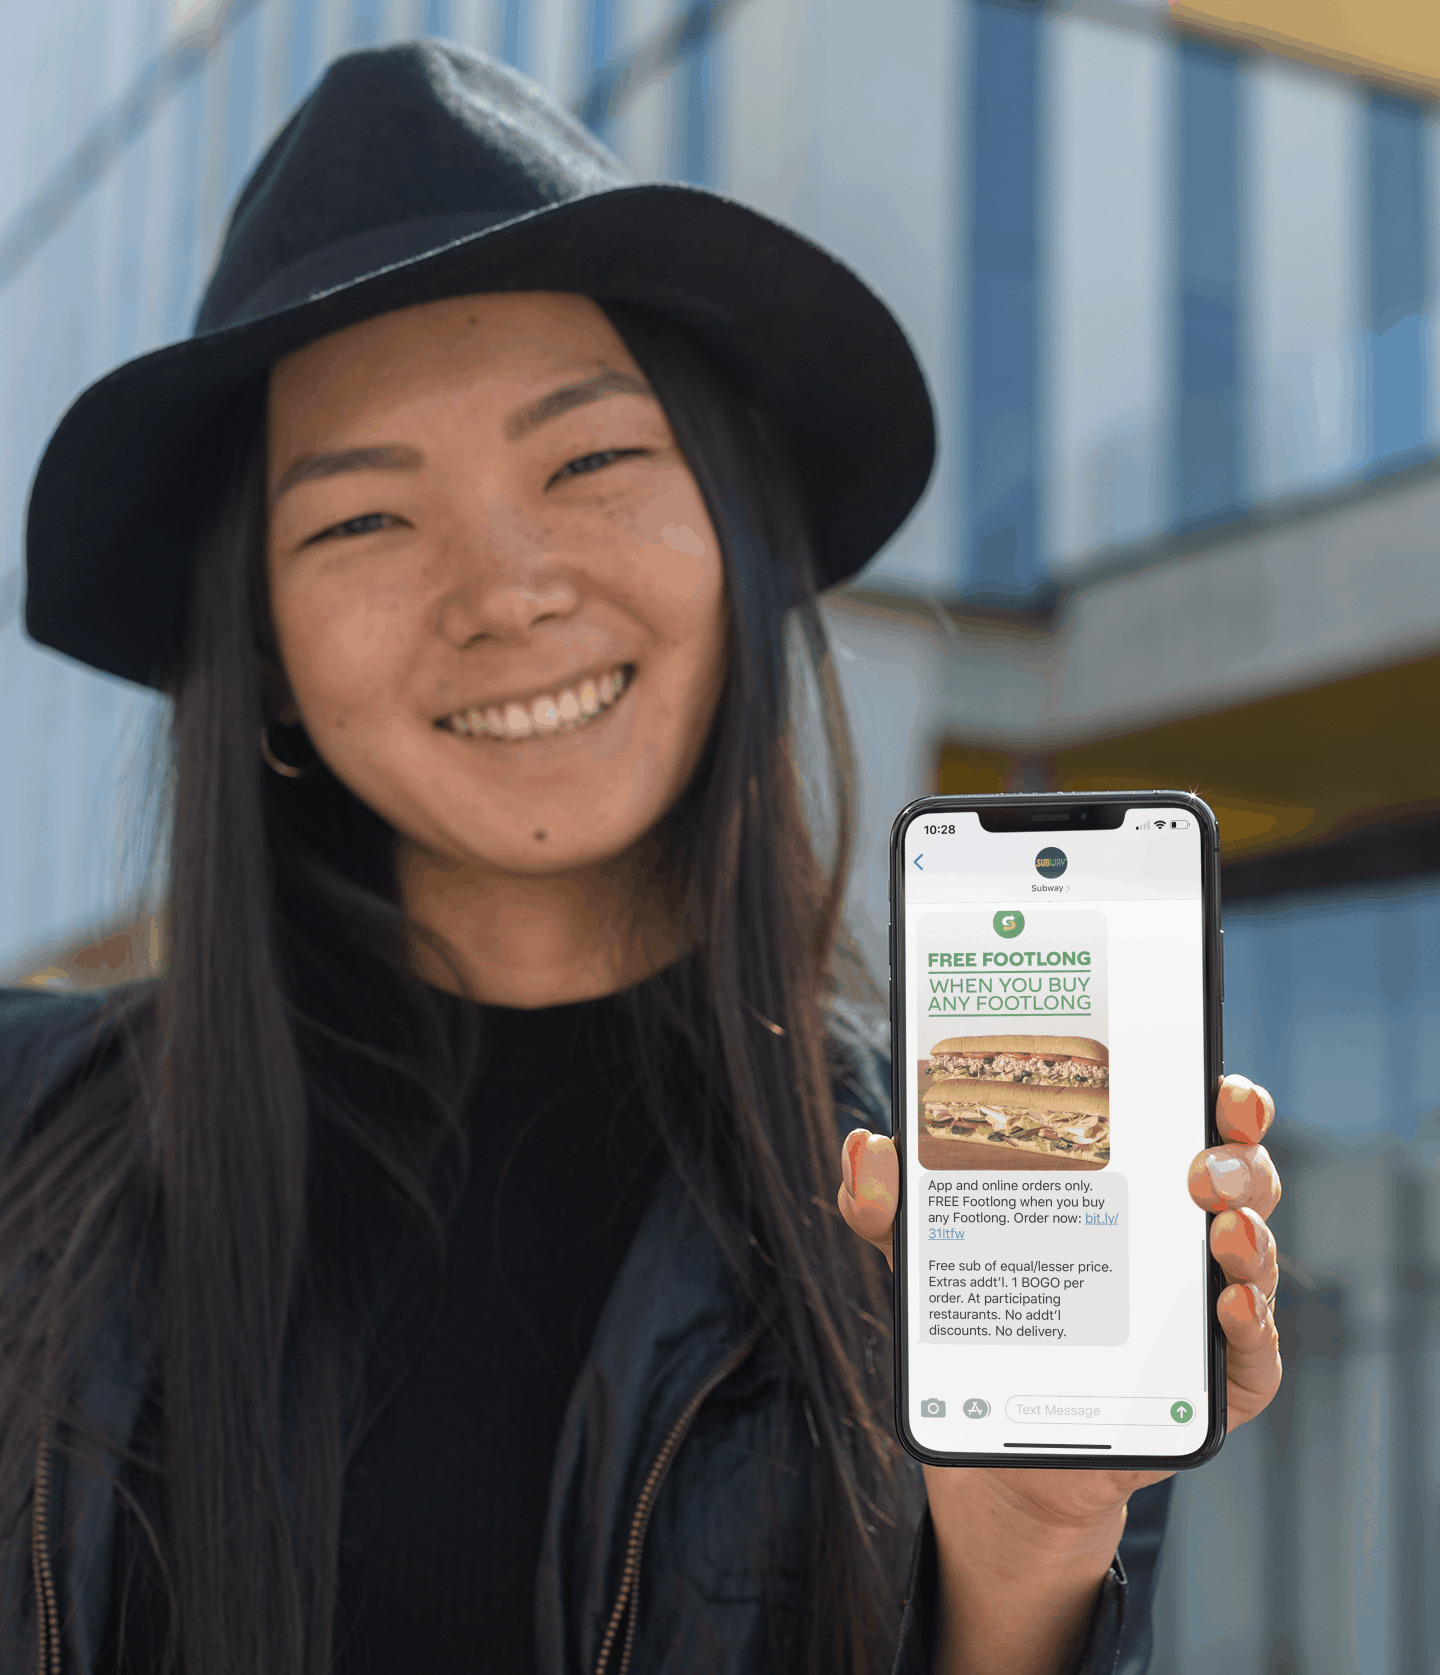 Woman with Subway Text Message Coupon